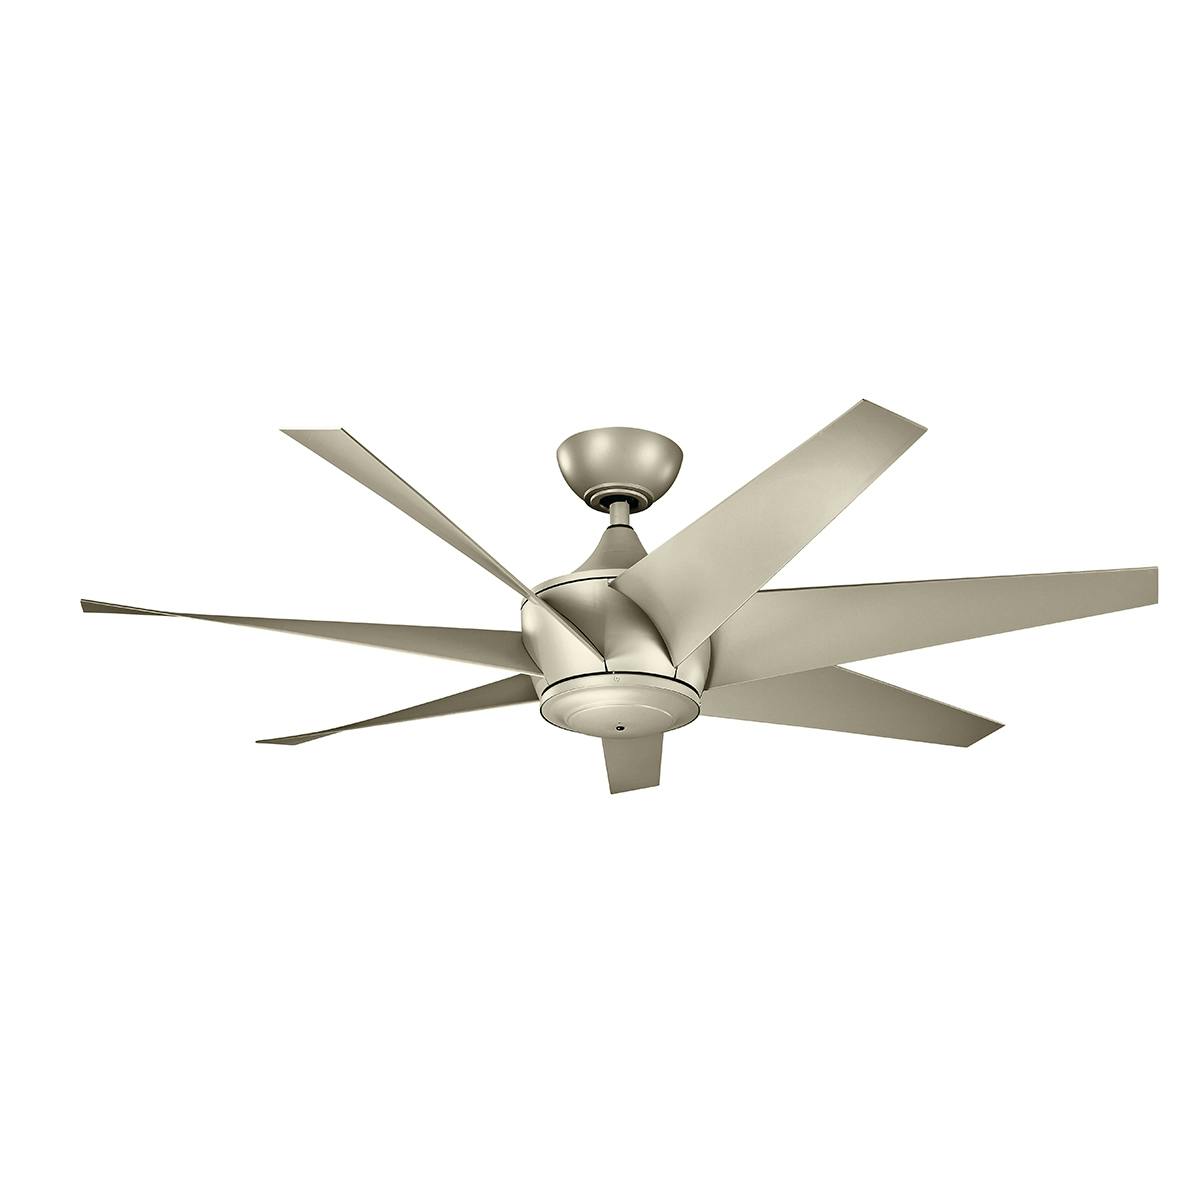 Lehr 54" Fan Antique Satin Silver on a white background